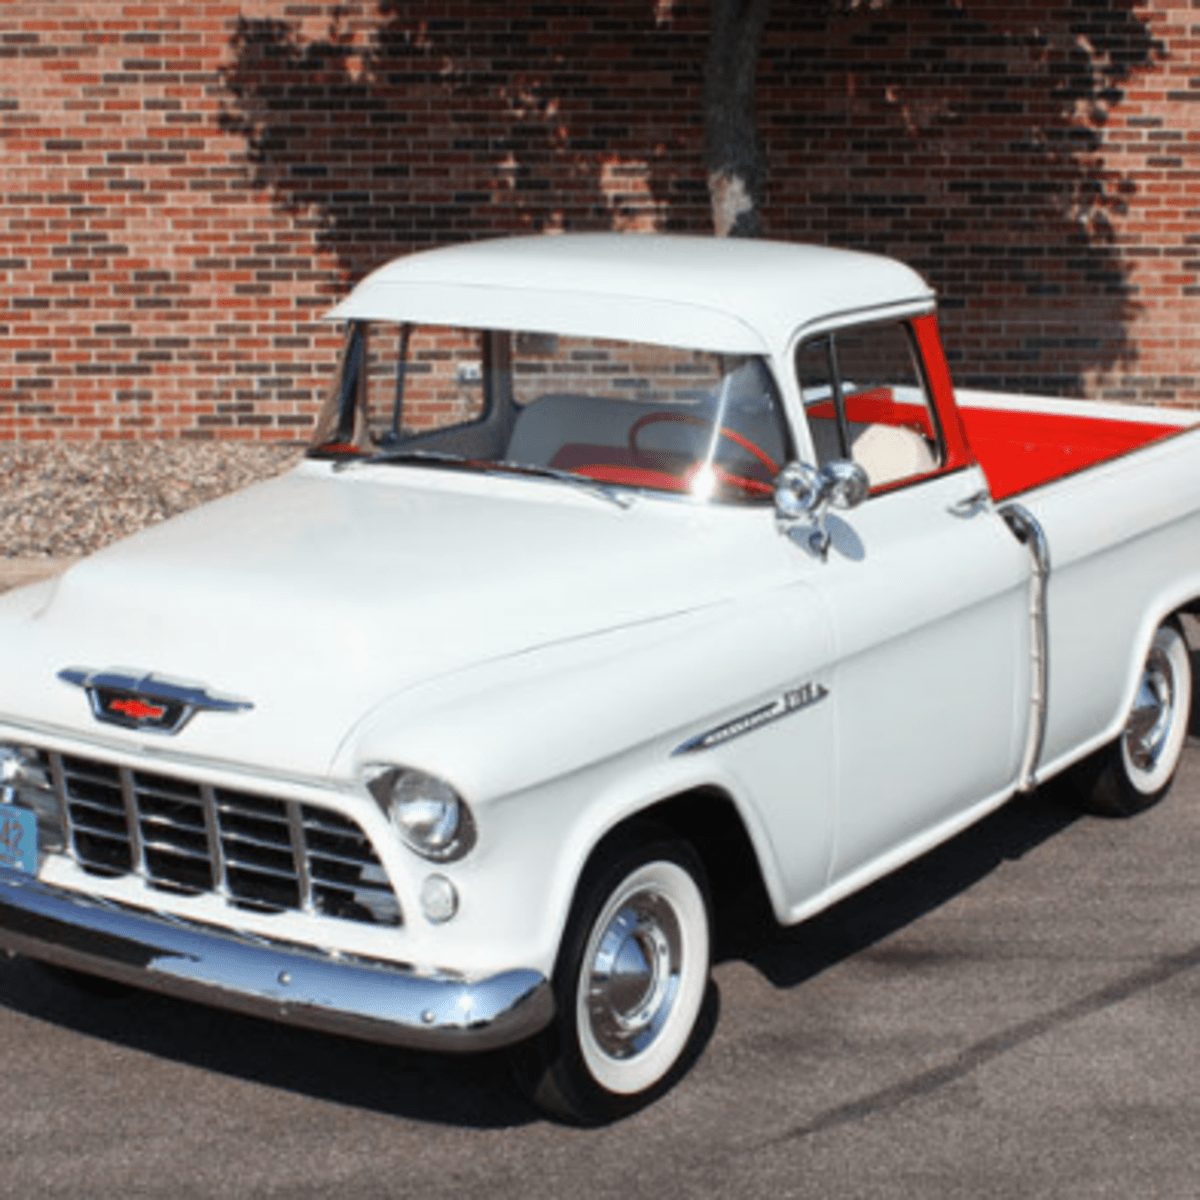 1955 Chevrolet Cameo Carrier pickup - Old Cars Weekly